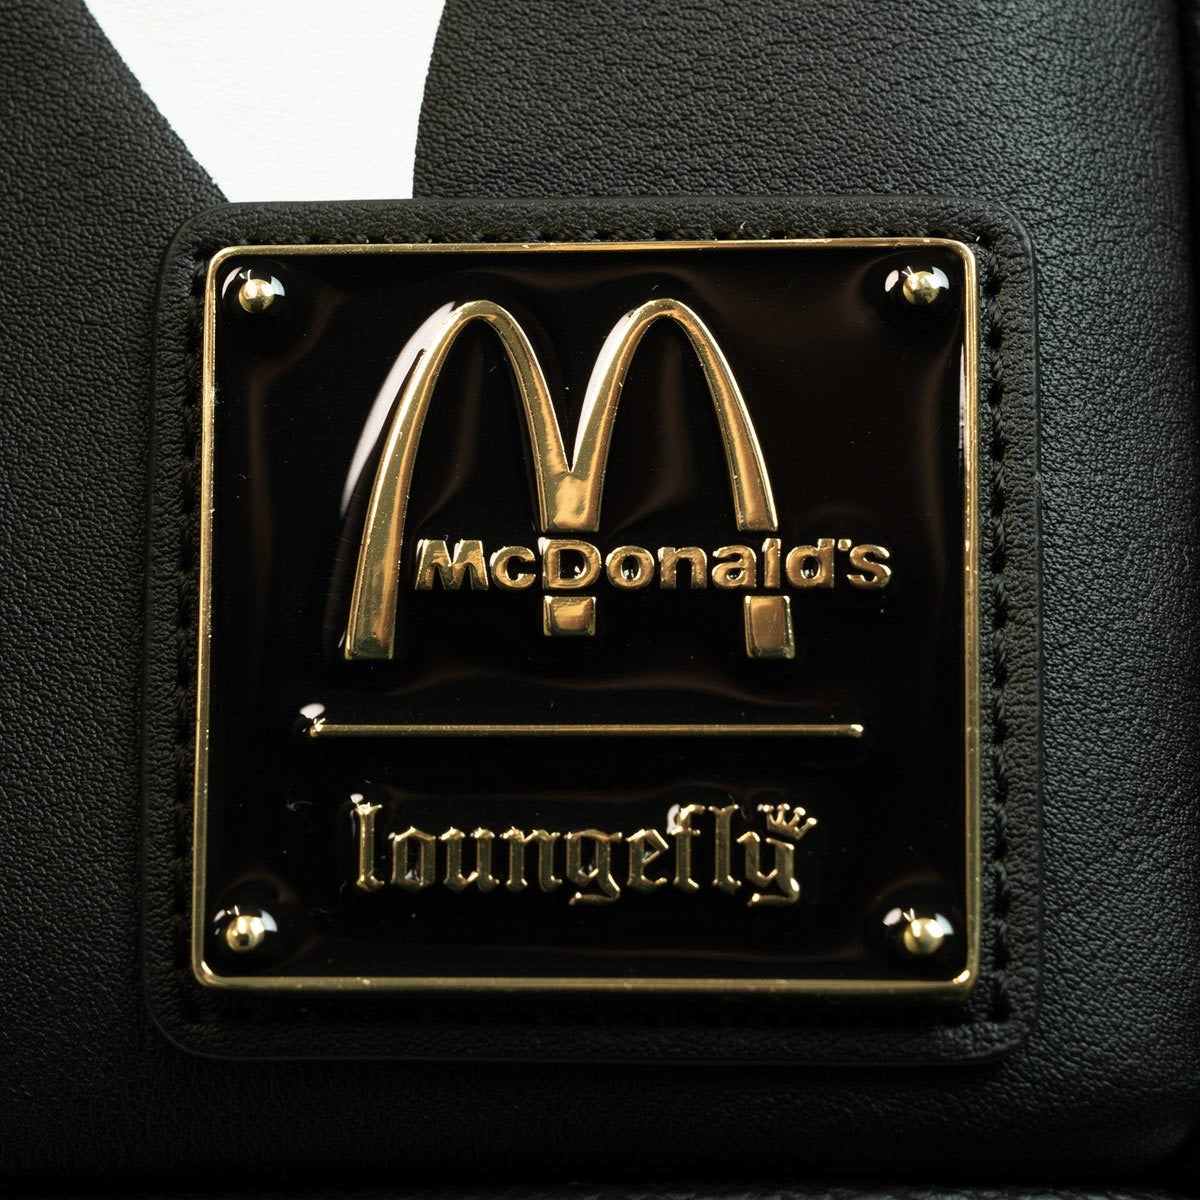 Loungefly McDonald's Vampire McNugget Mini-Backpack - *PREORDER***